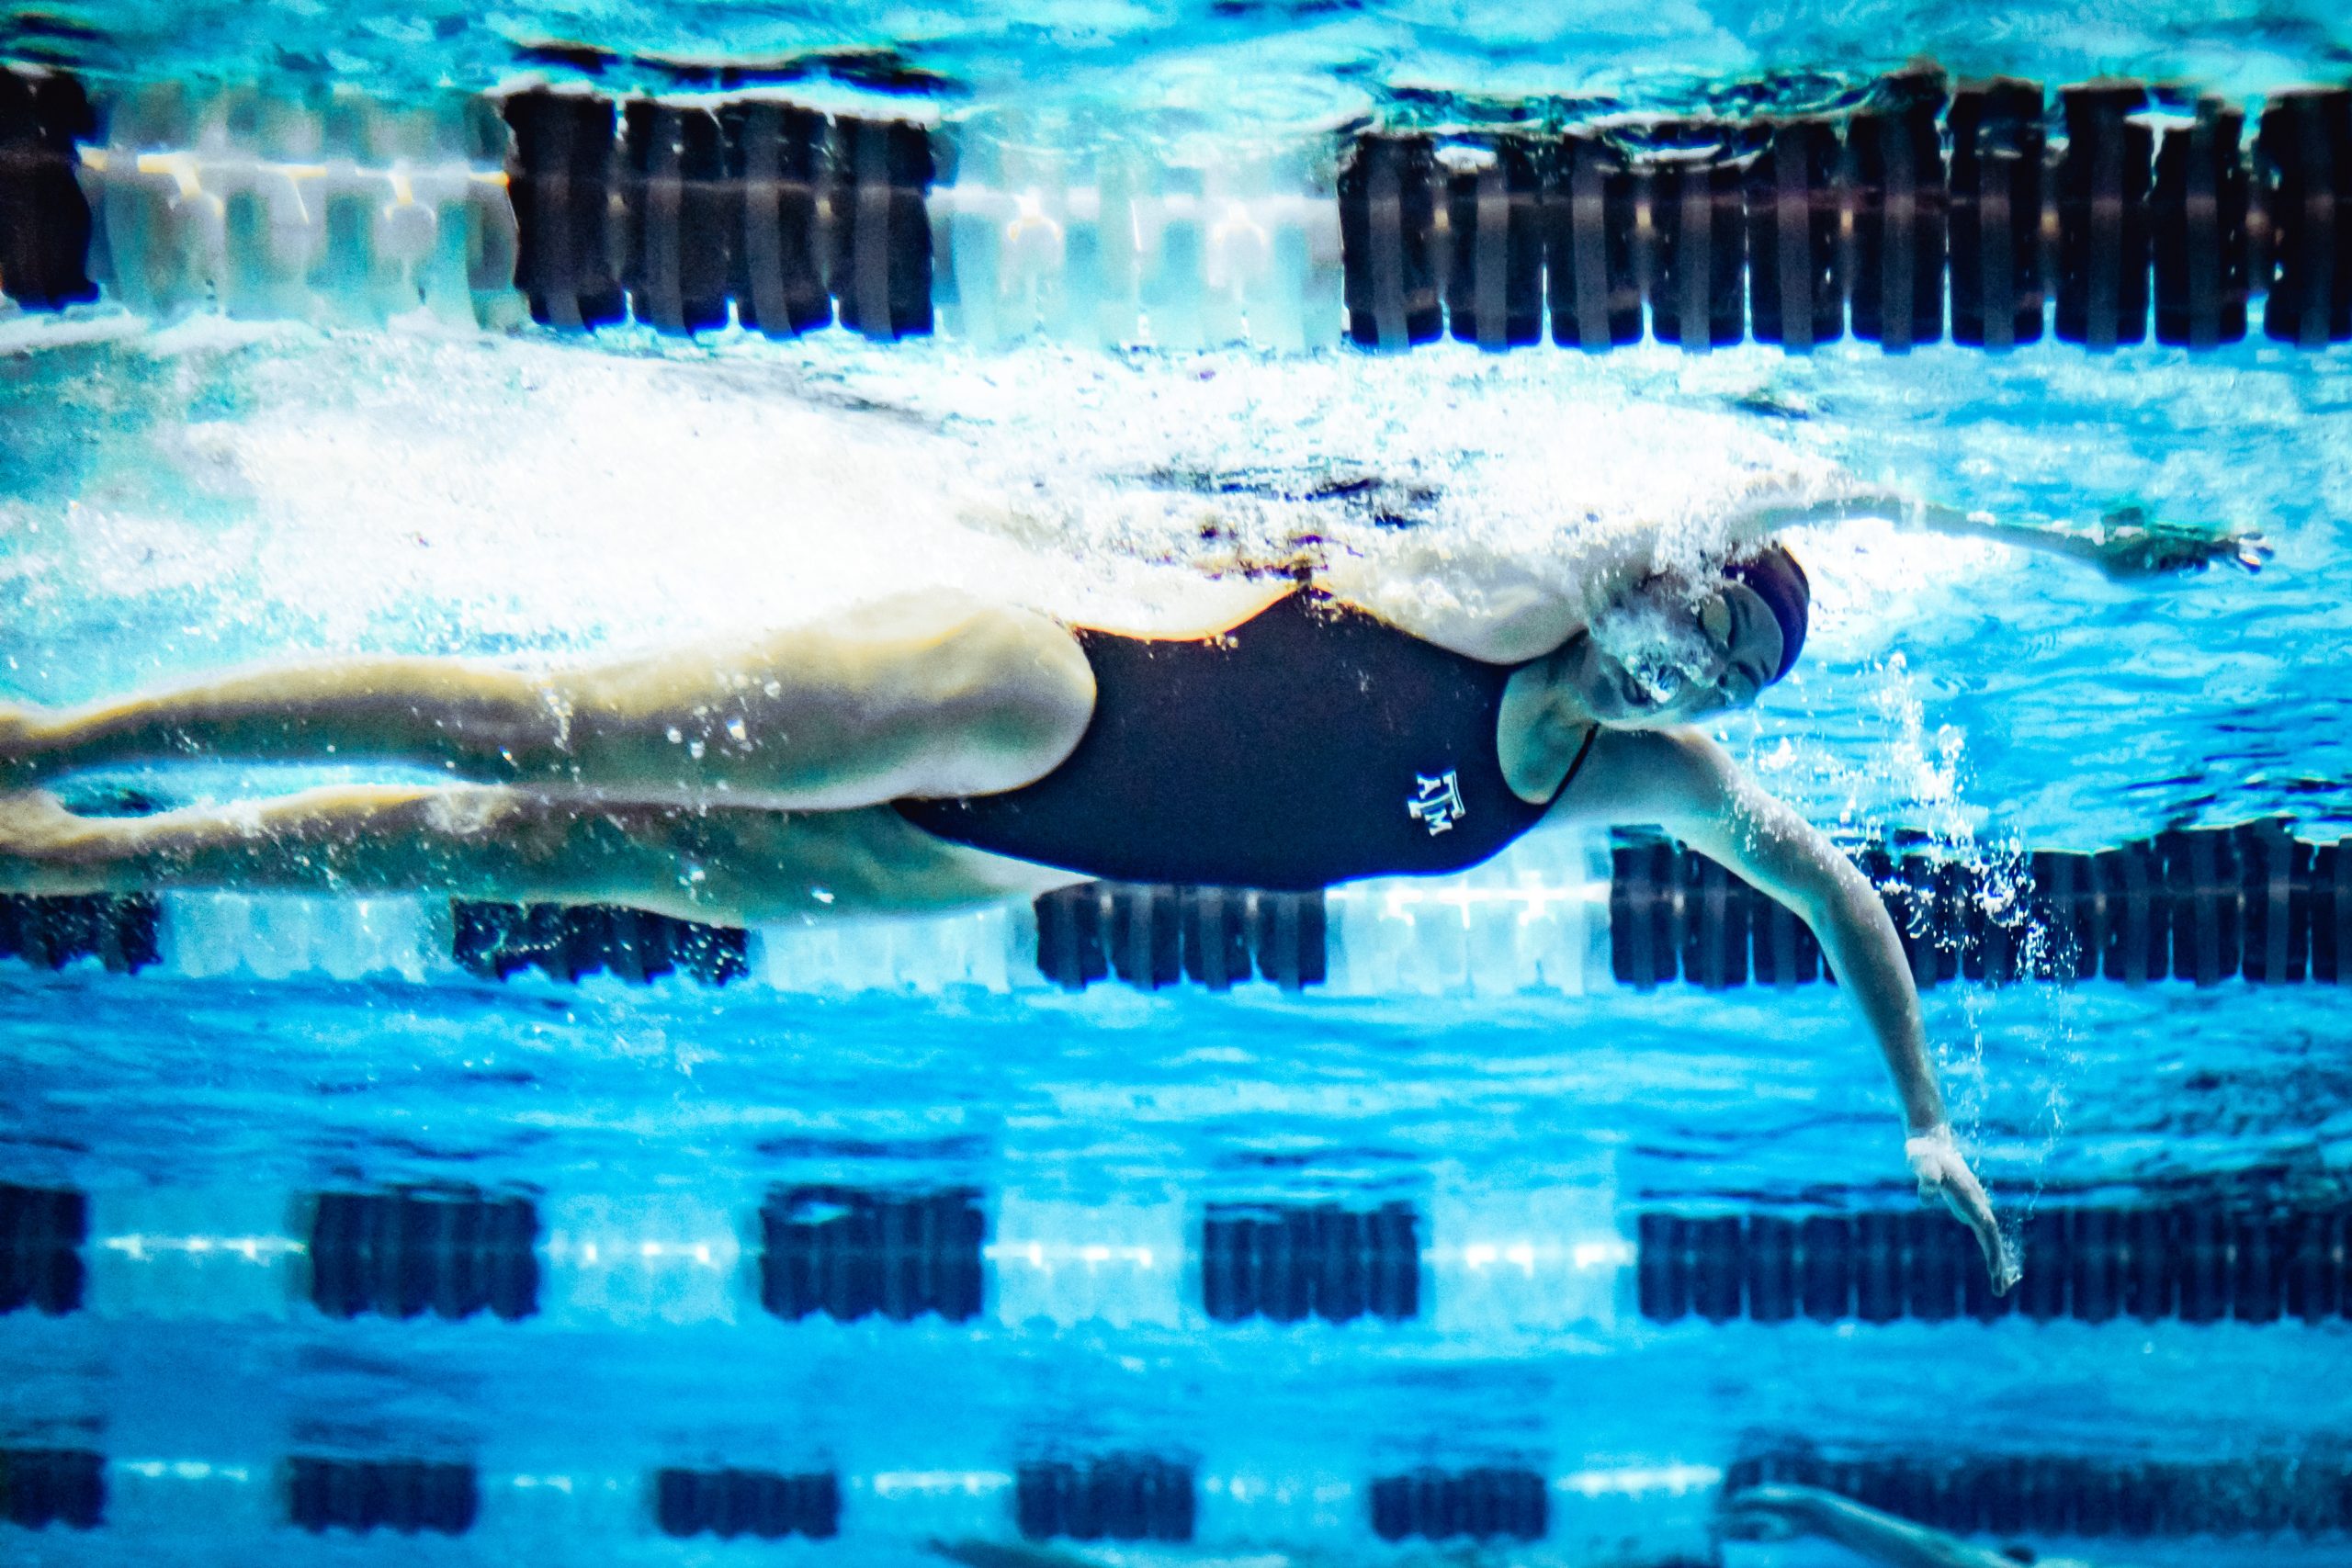 GALLERY%3A+Womens+Swimming+vs.+Rice